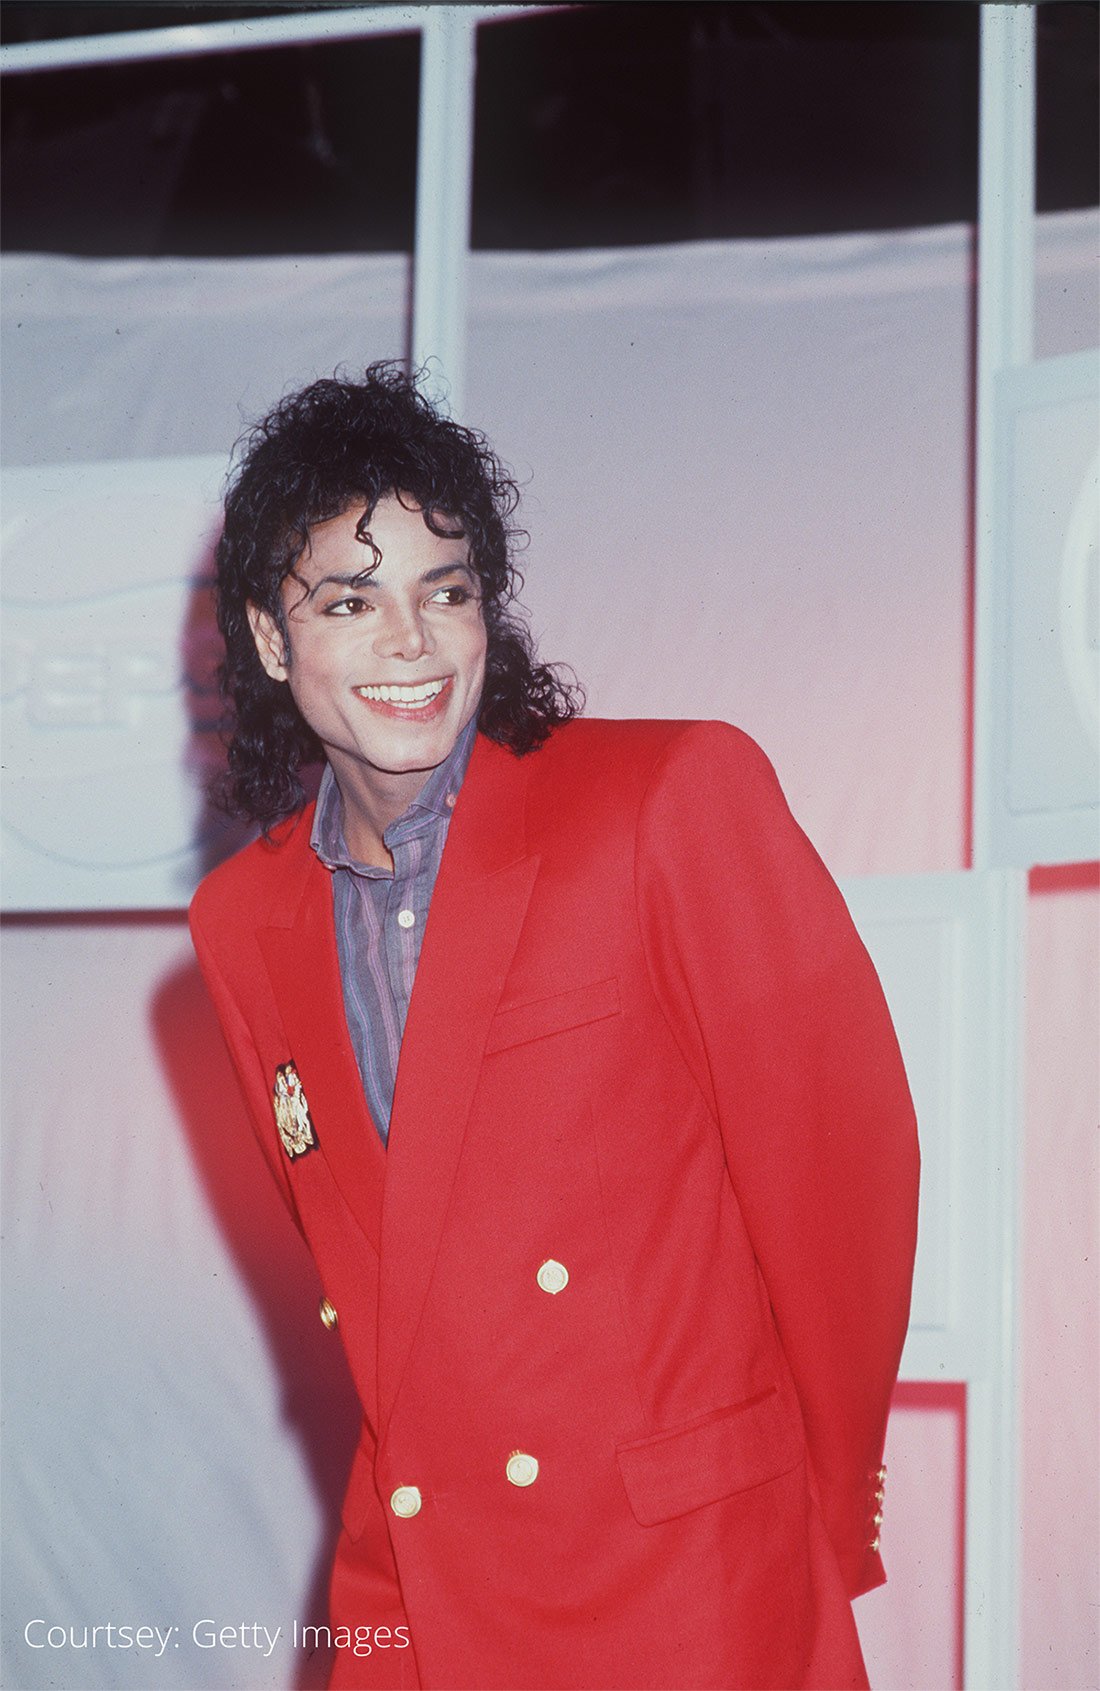 Michael Jackson during his tour in London in 1988